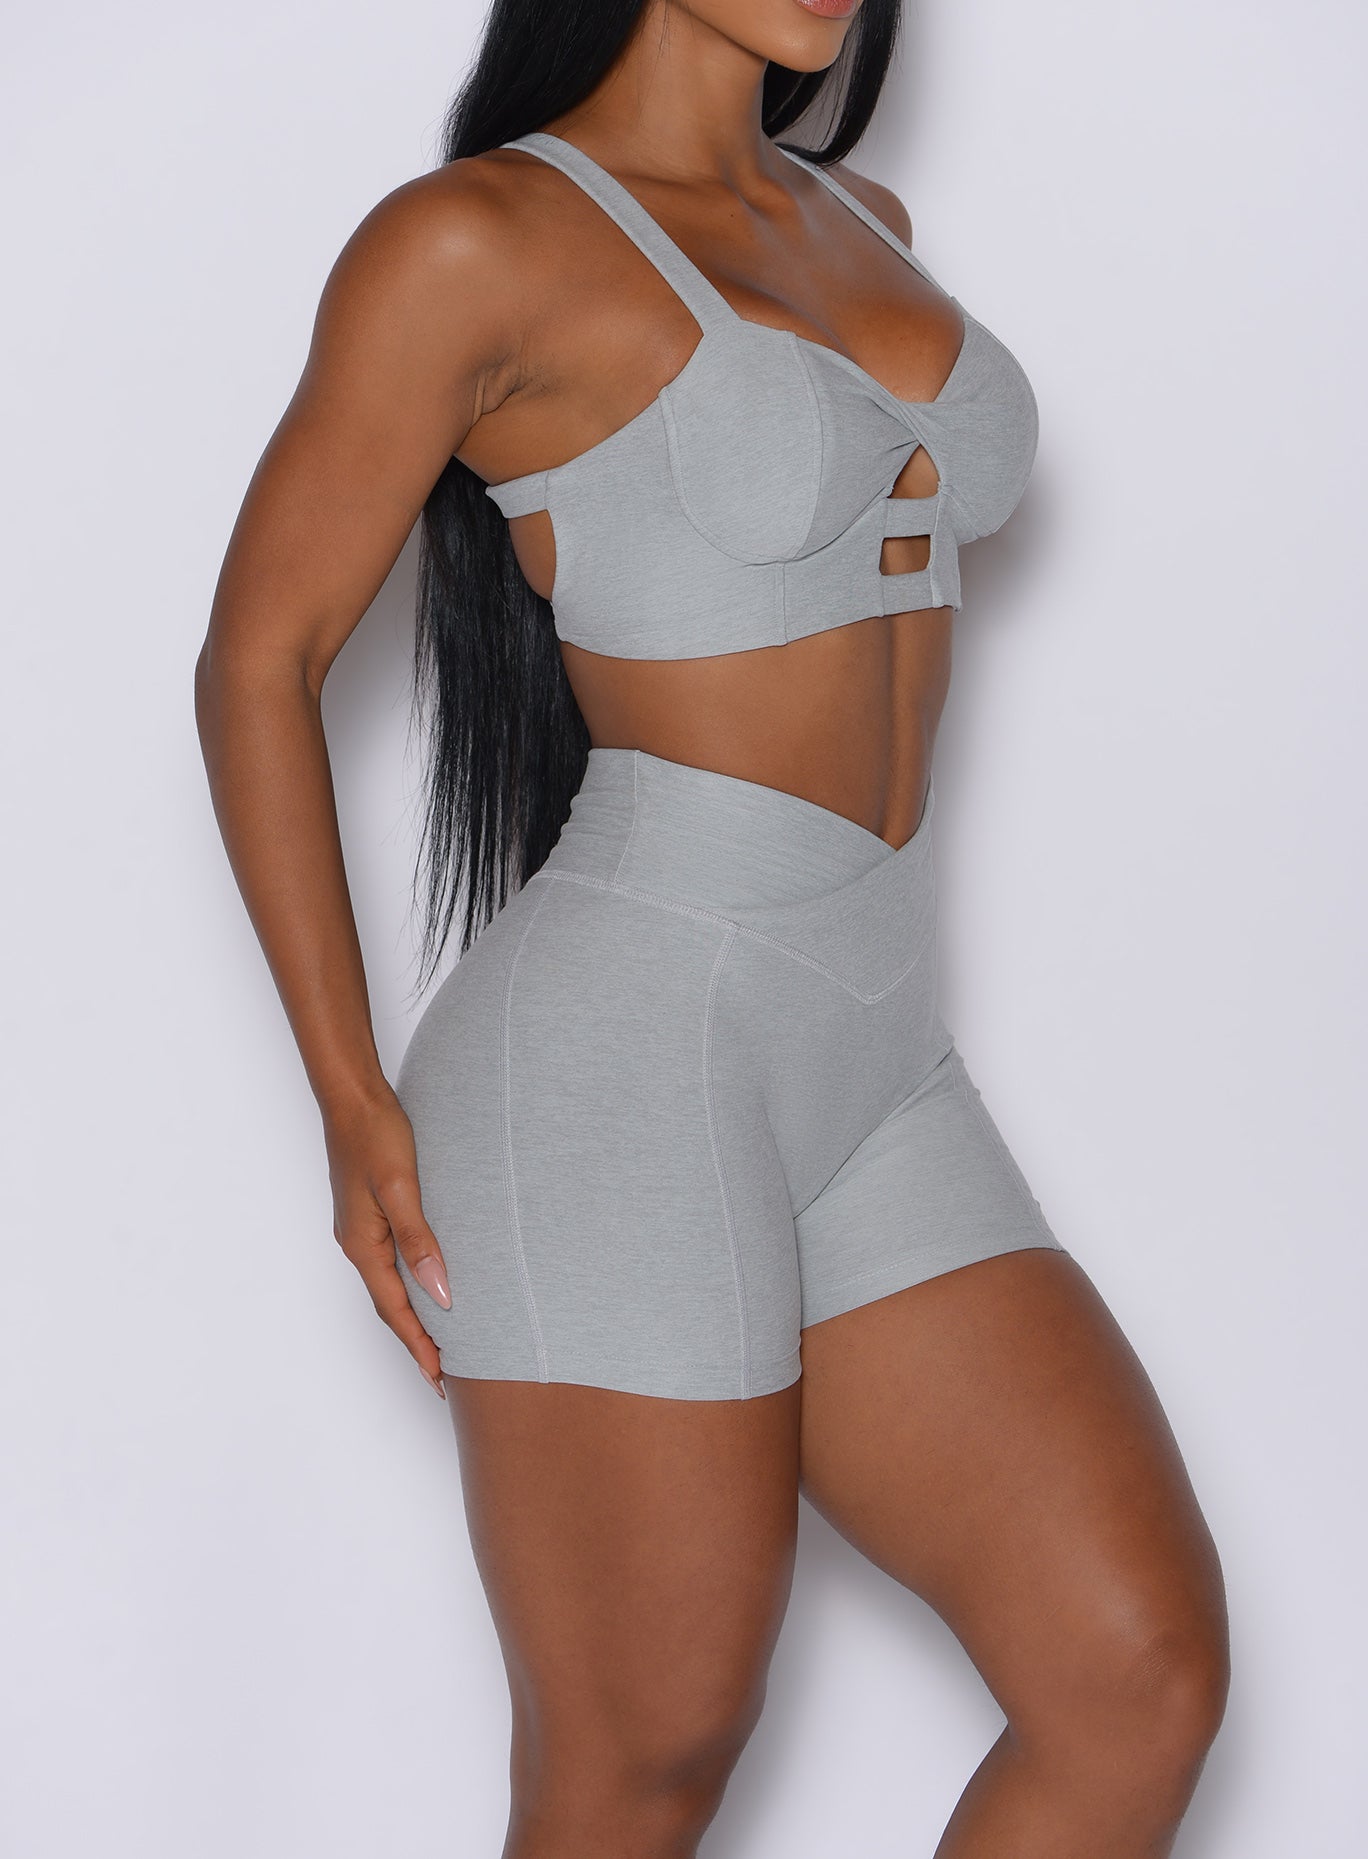 right side profile view of a model wearing our Tiny Waists Shorts in light cloud color along with the matching bra